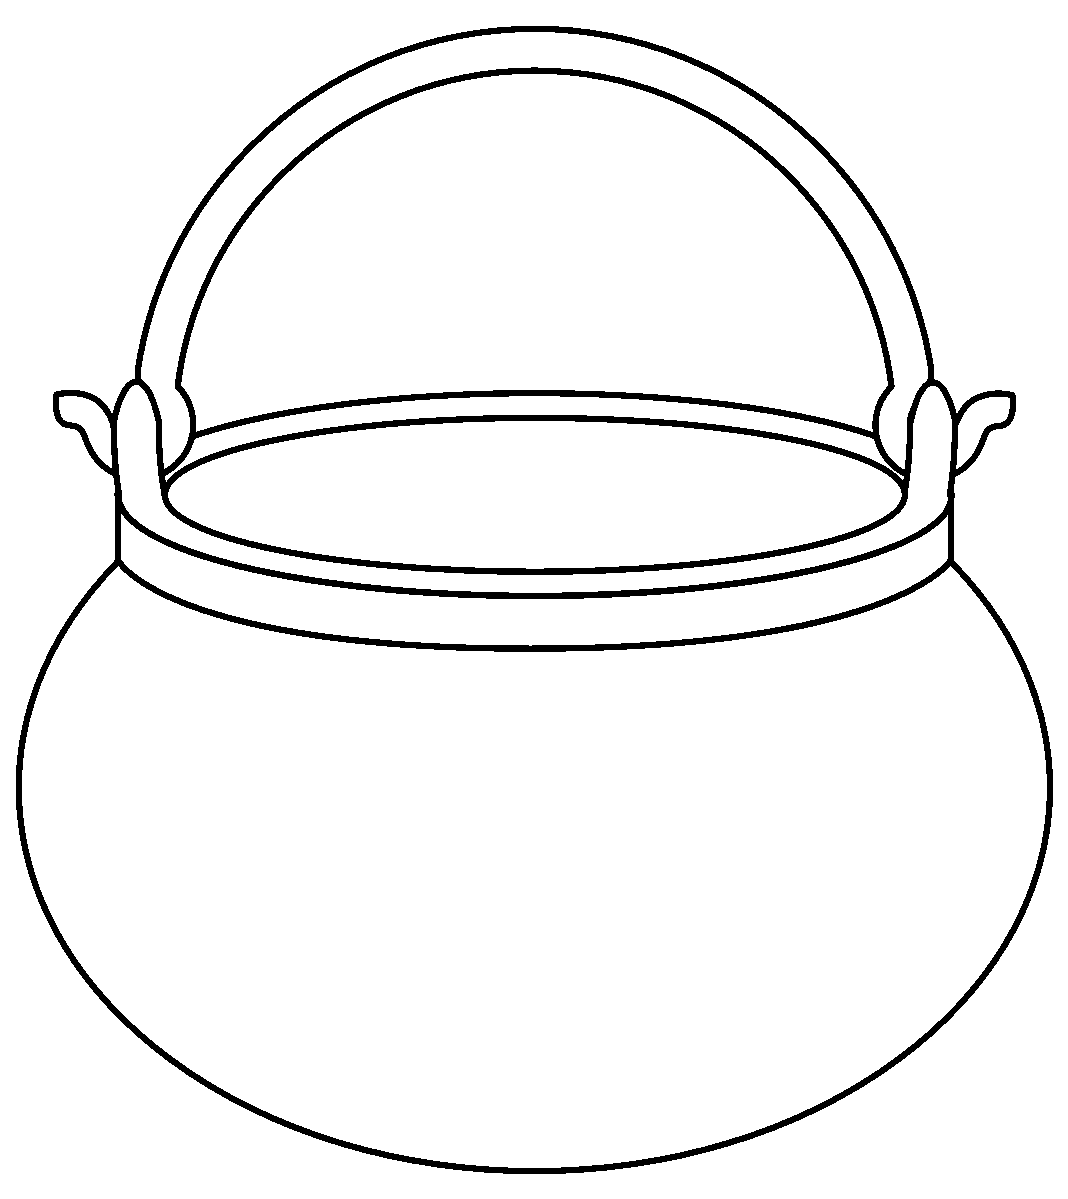 Printable Cauldron The Template Can Be Used In A Few Different Ways.